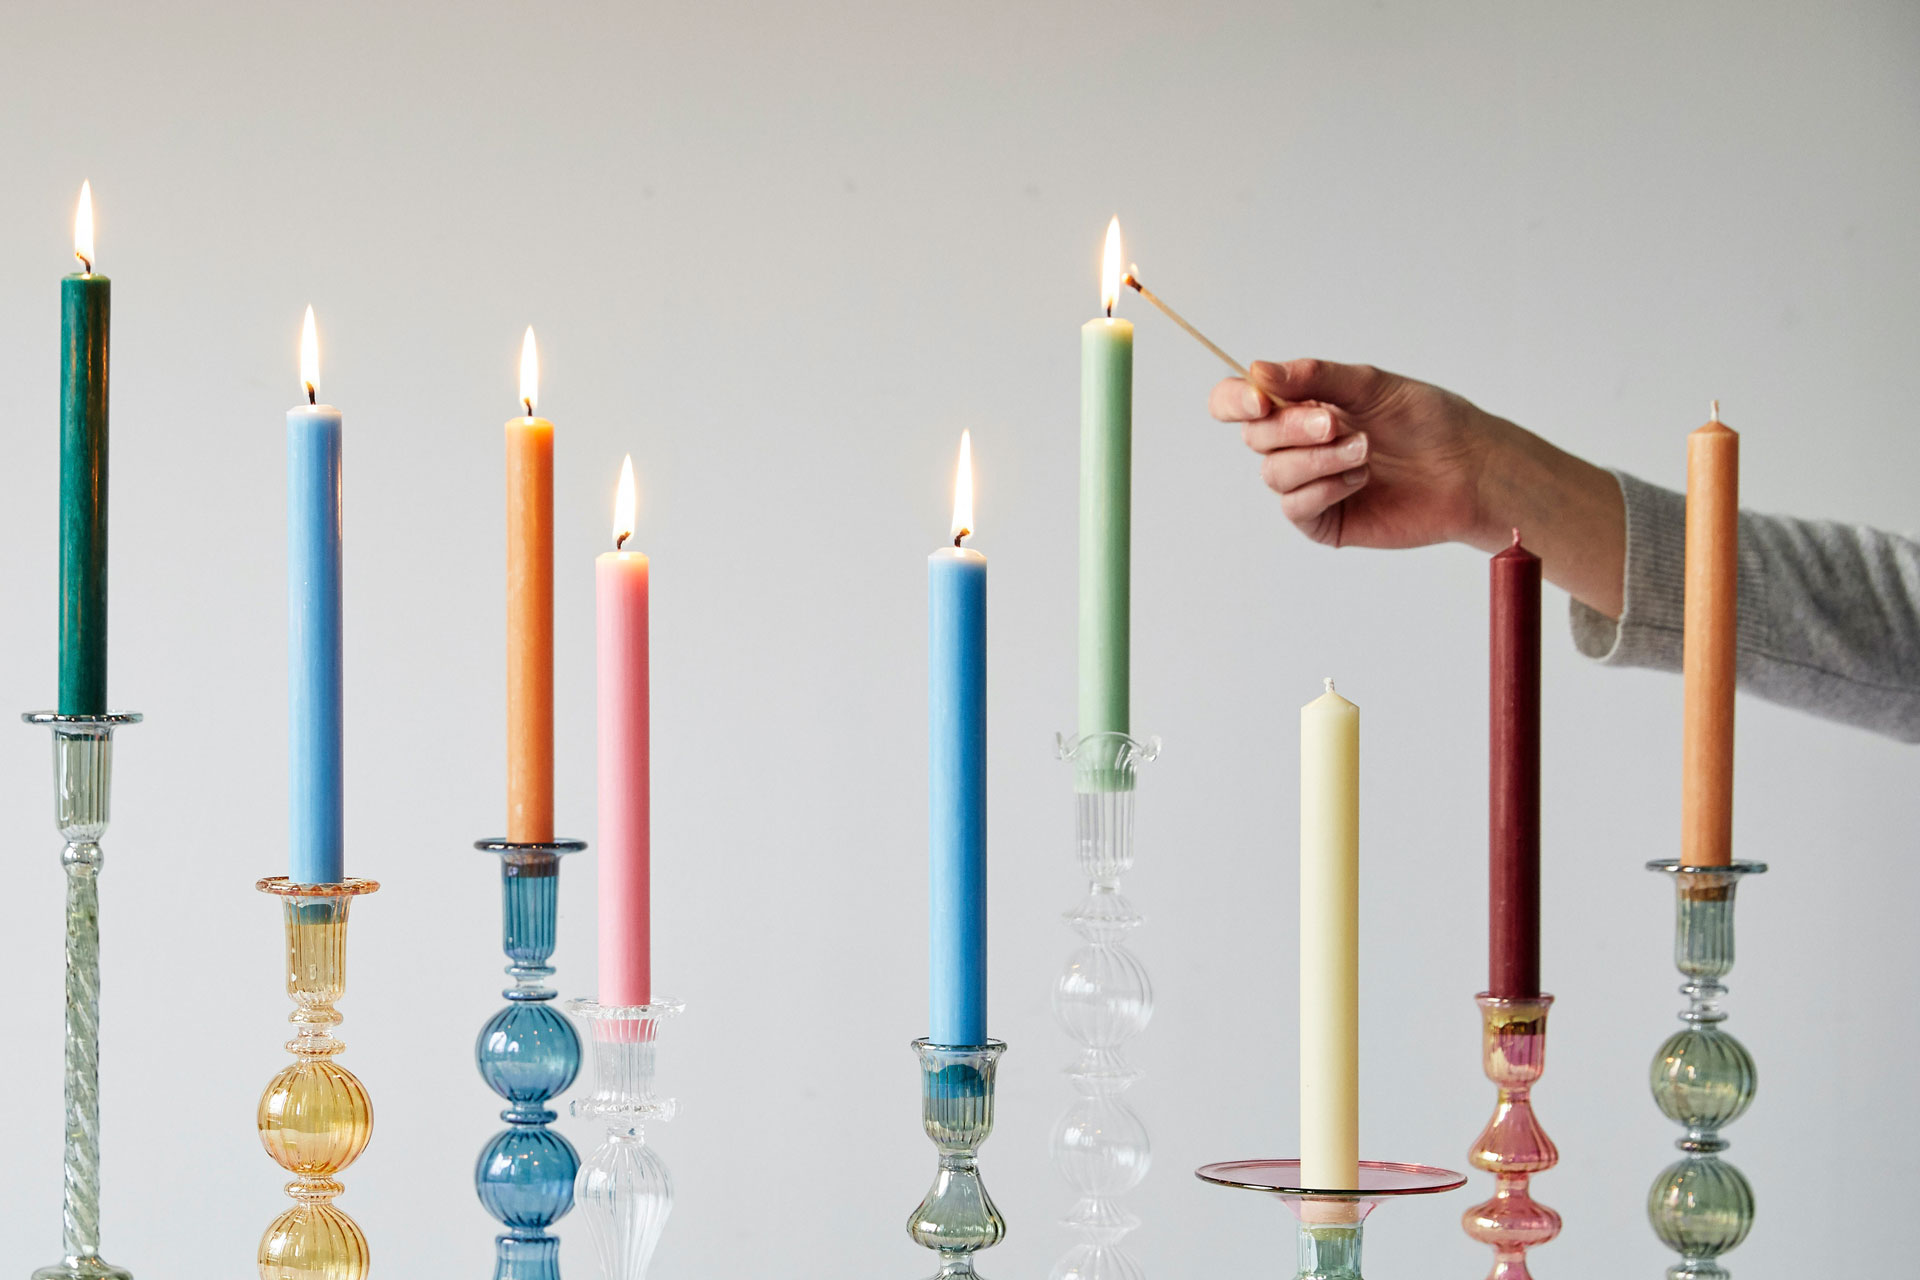 close up of a hand lighting an array of long colourful dinner candles with a match